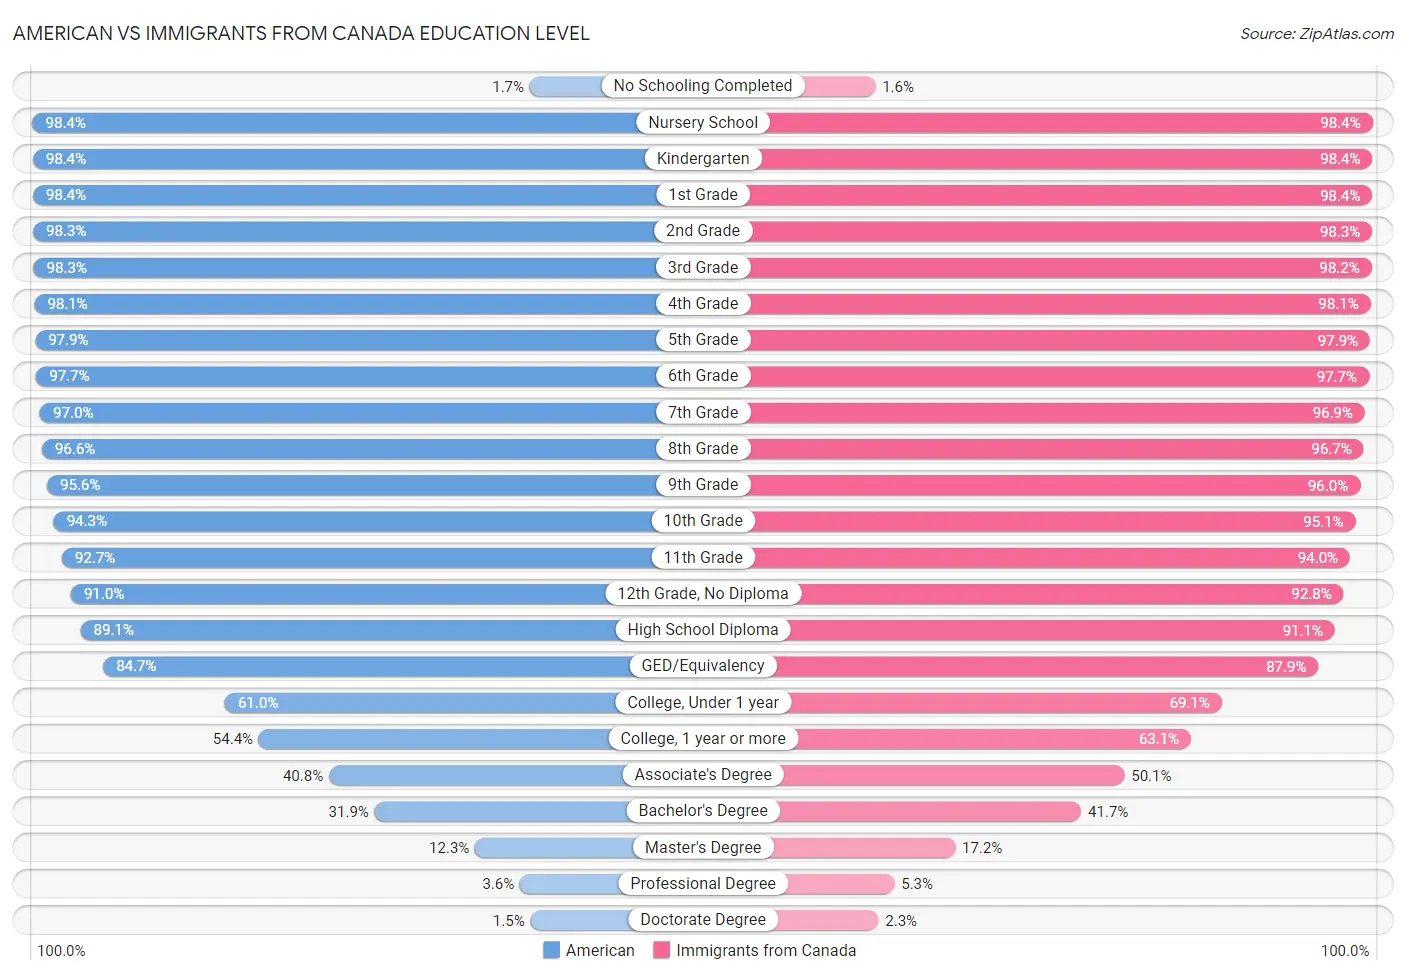 American vs Immigrants from Canada Education Level